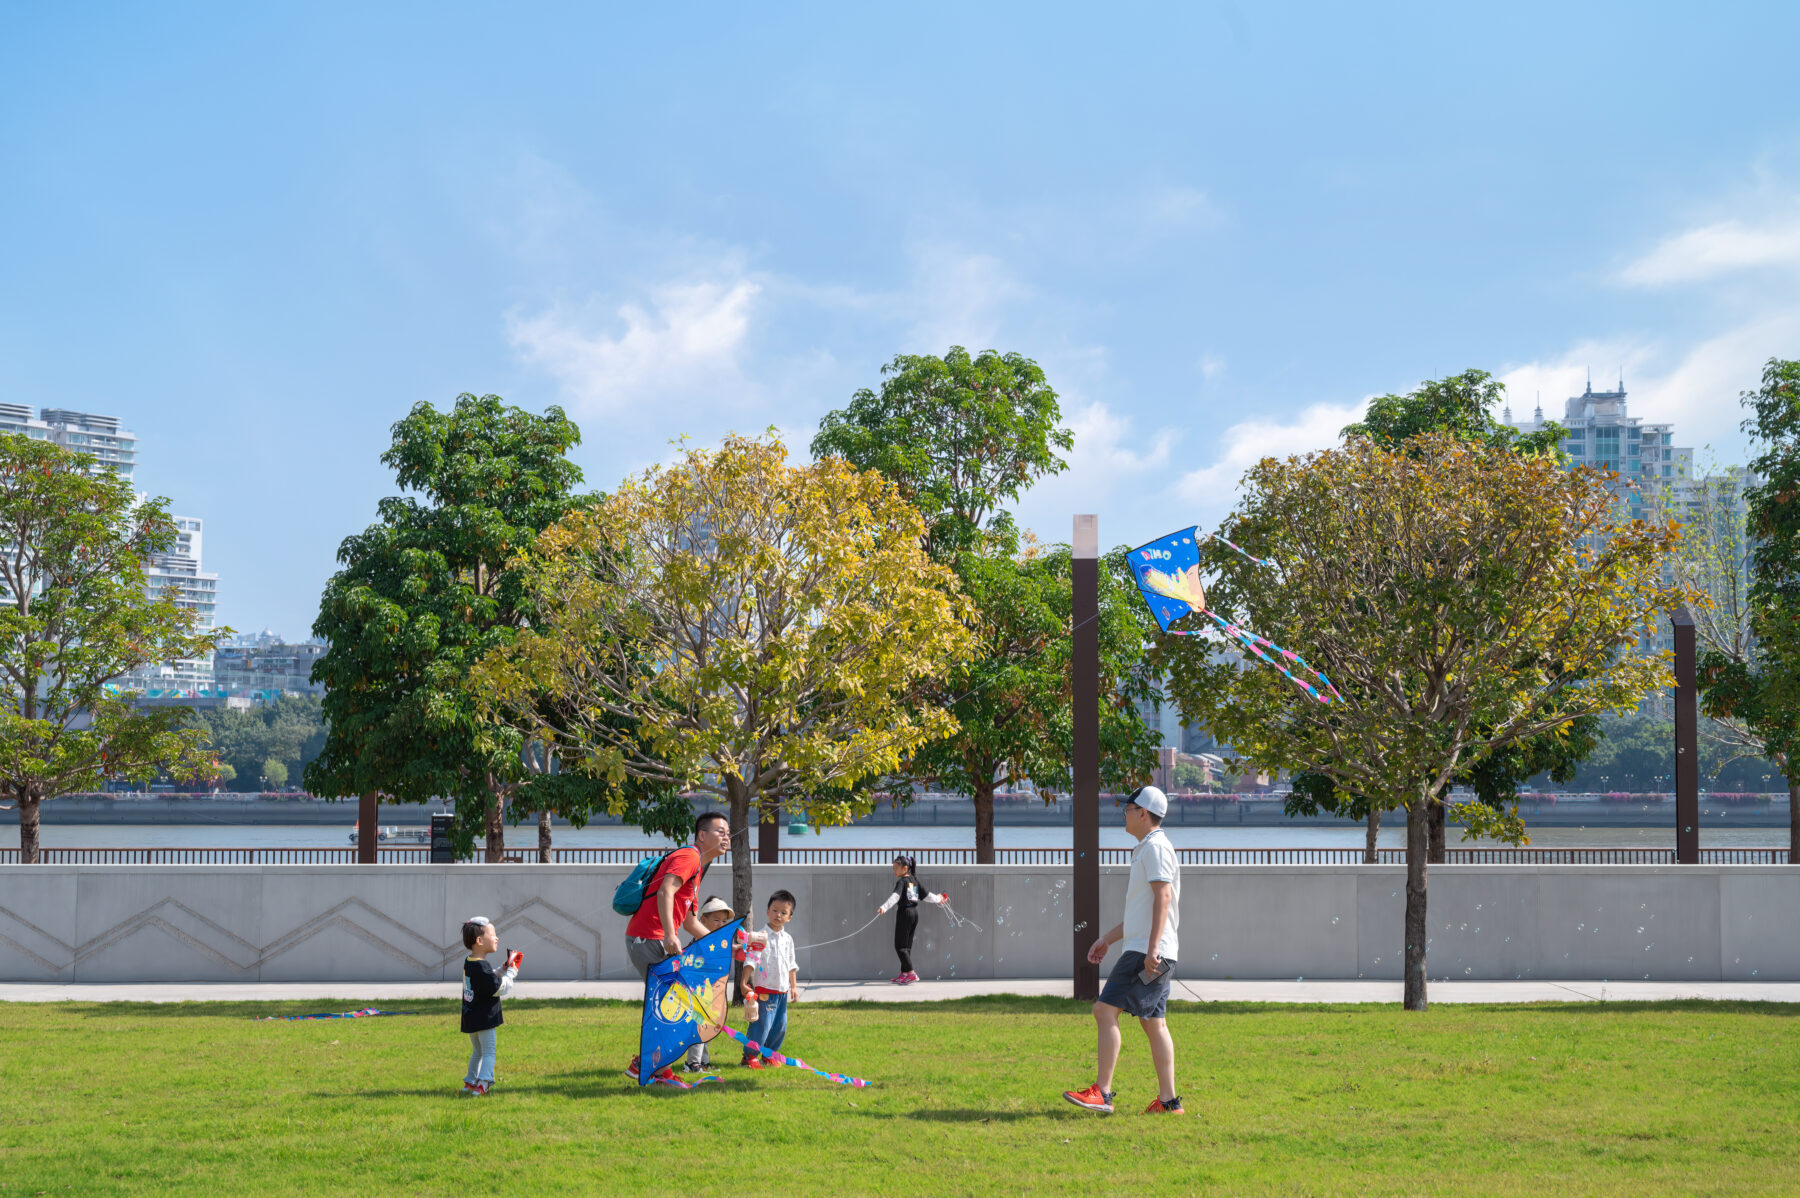 Photo of the event lawn with a small family playing with a kite